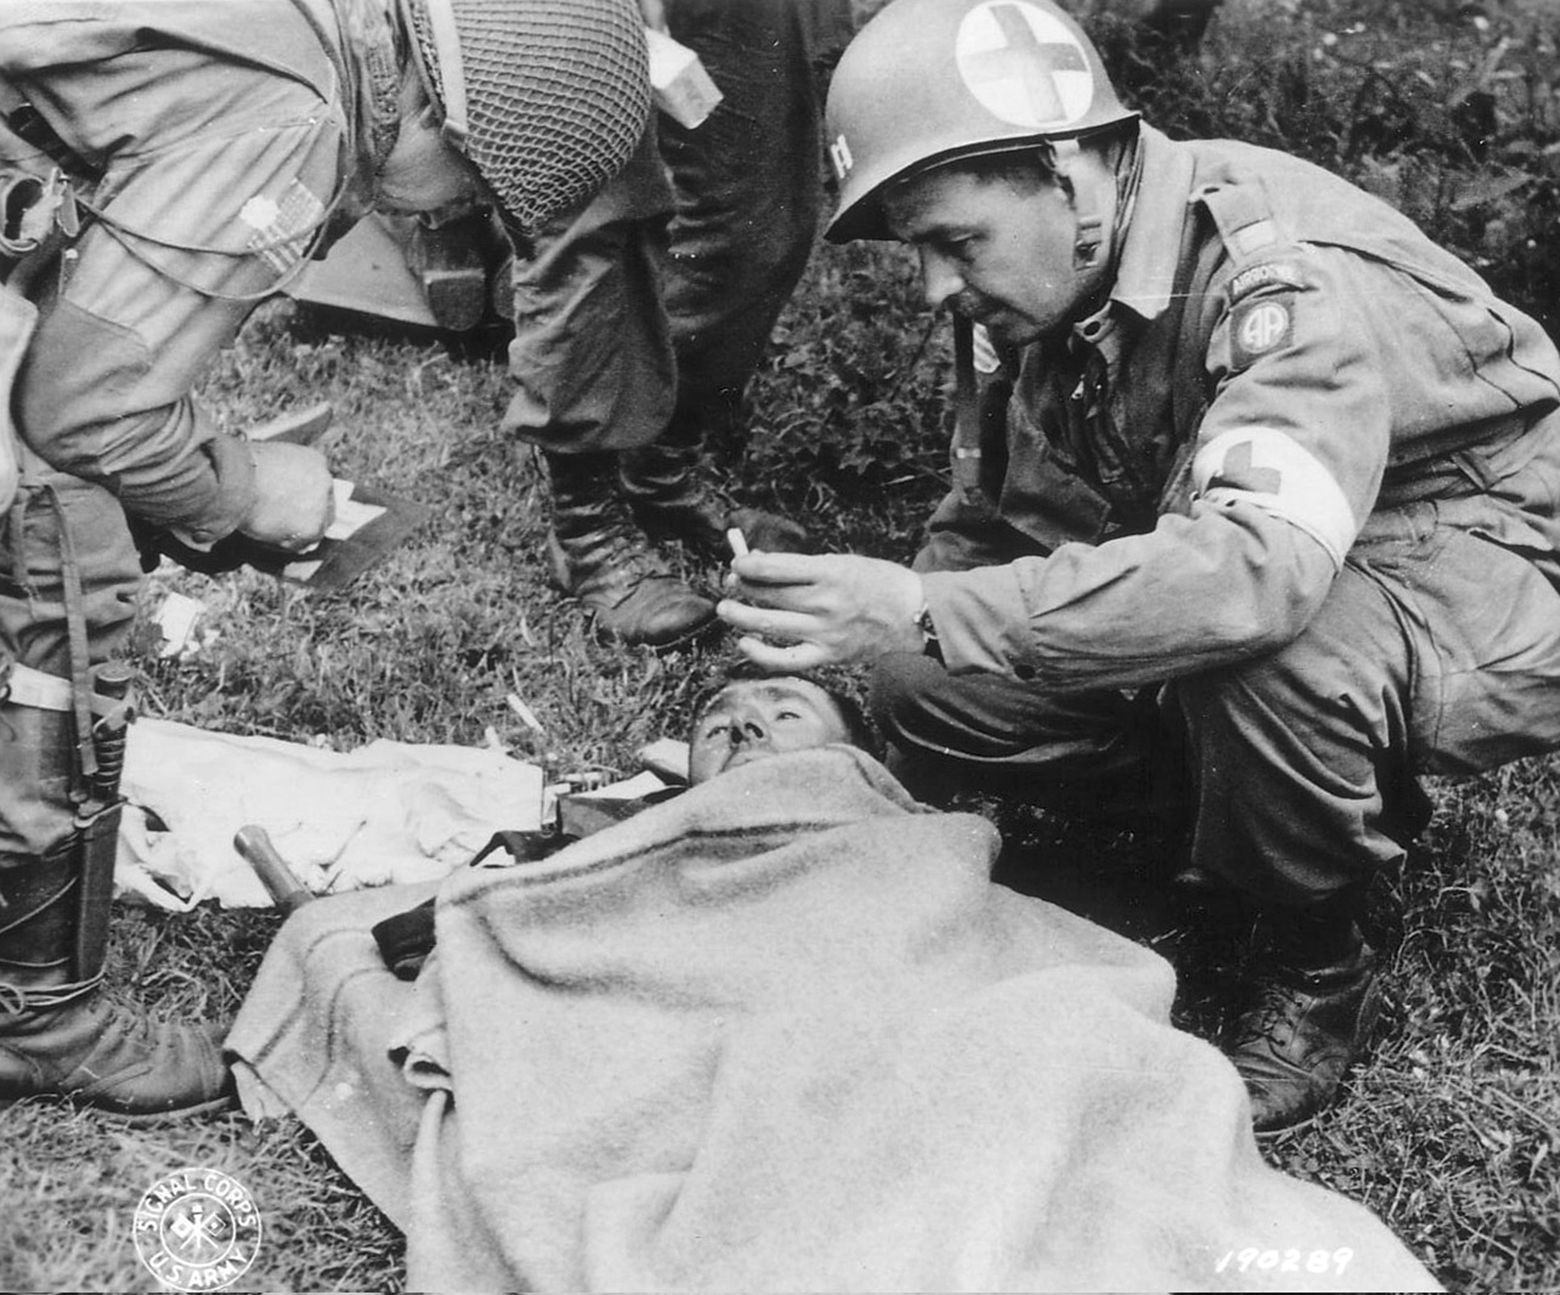 A captain in an 82nd Airborne Division medical unit (right) gives a cigarette to a wounded German soldier.